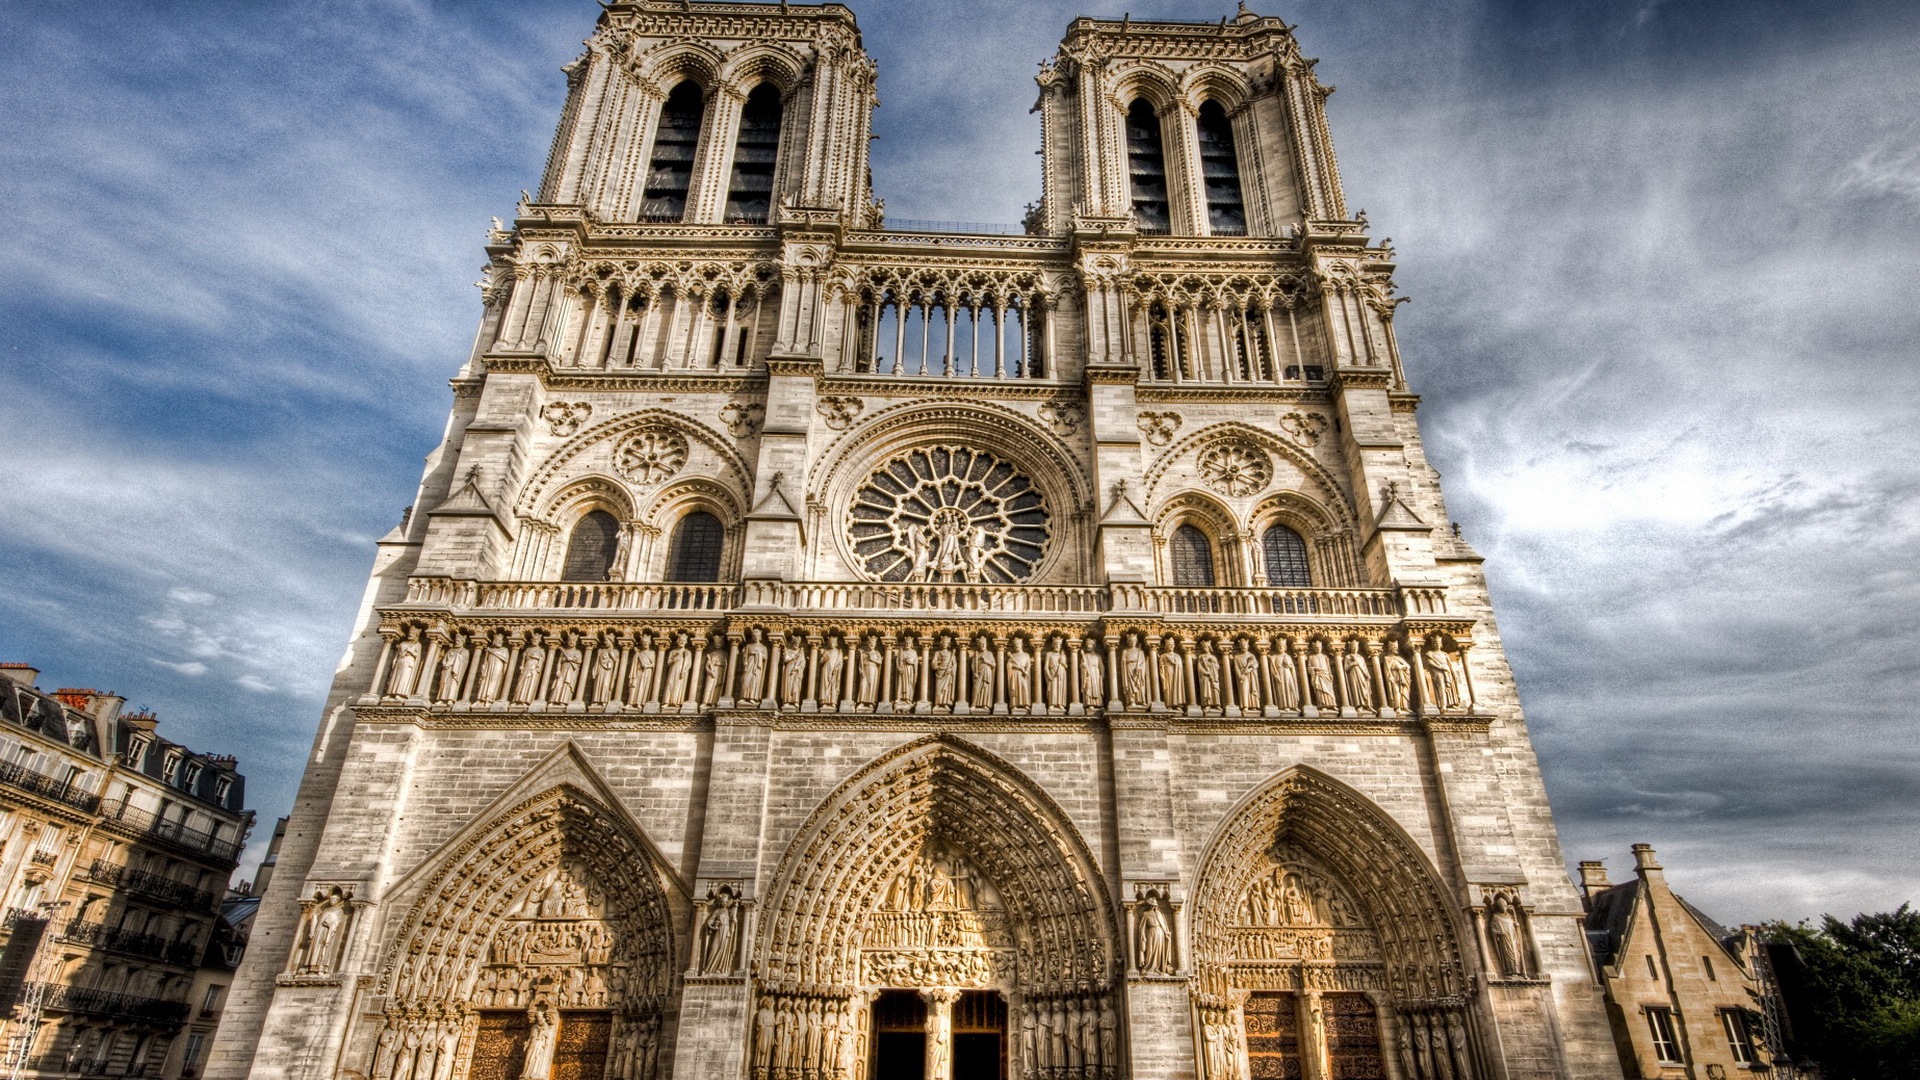 Notre Dame HD Wallpapers #14 - 1920x1080